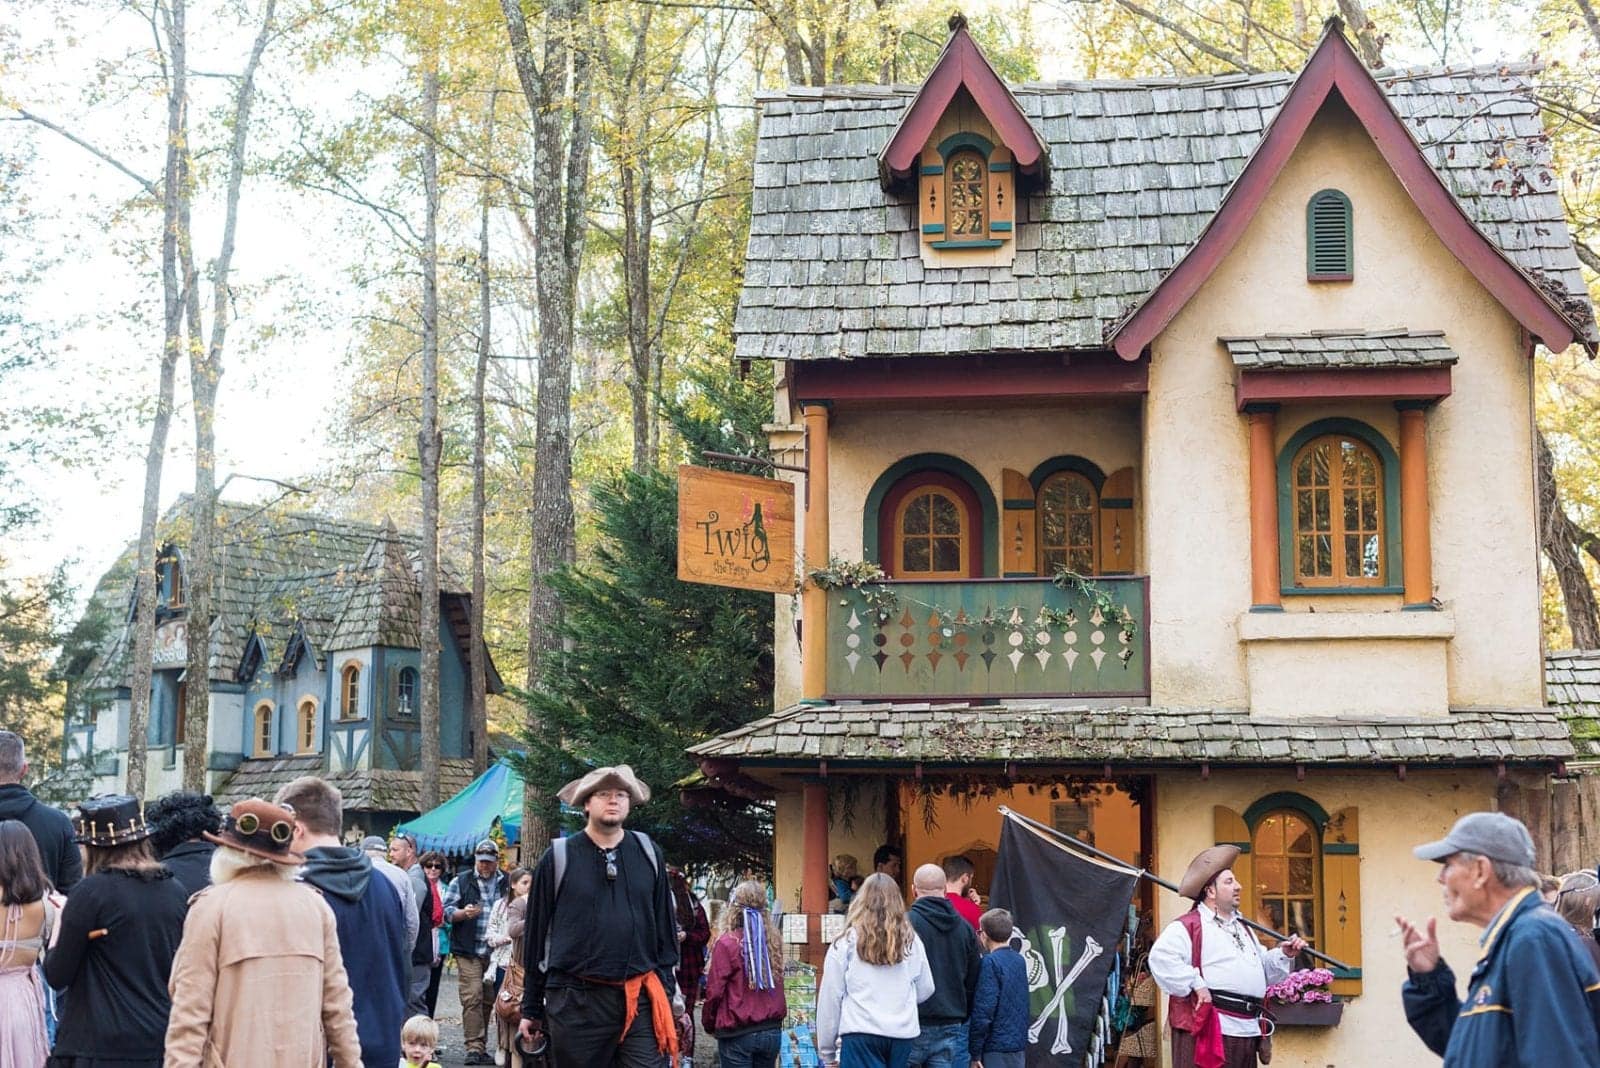 North Carolina Renaissance Festival: Visitor Info and Behind the Scenes Q&A